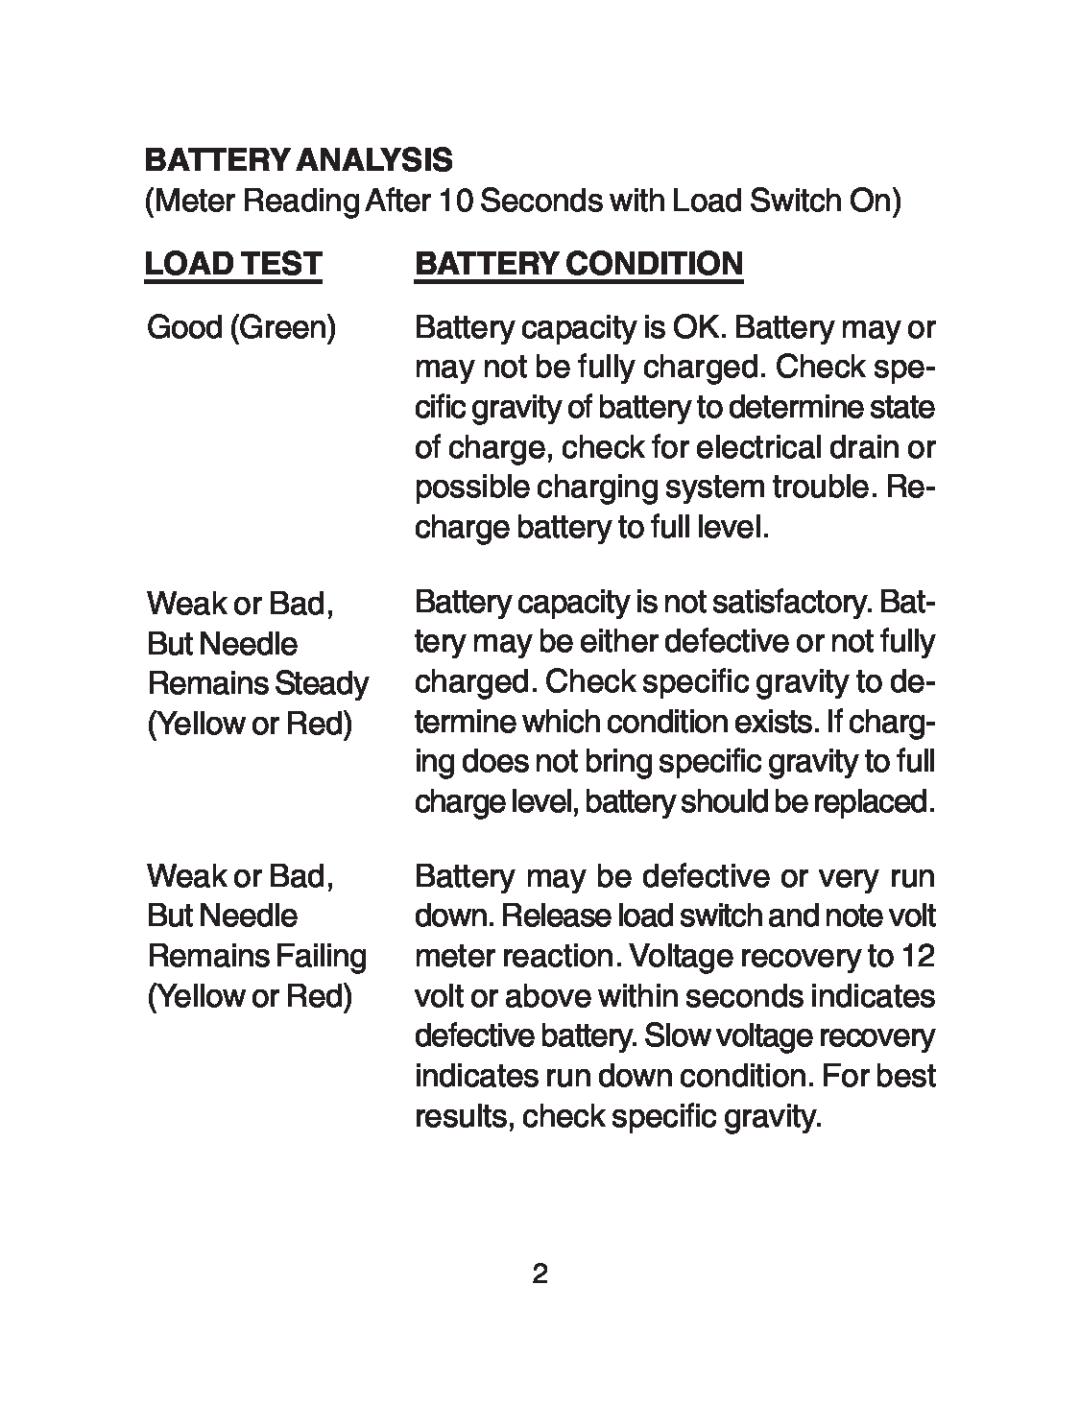 Schumacher BT-100 Battery Analysis, Load Test, Battery Condition, Meter Reading After 10 Seconds with Load Switch On 